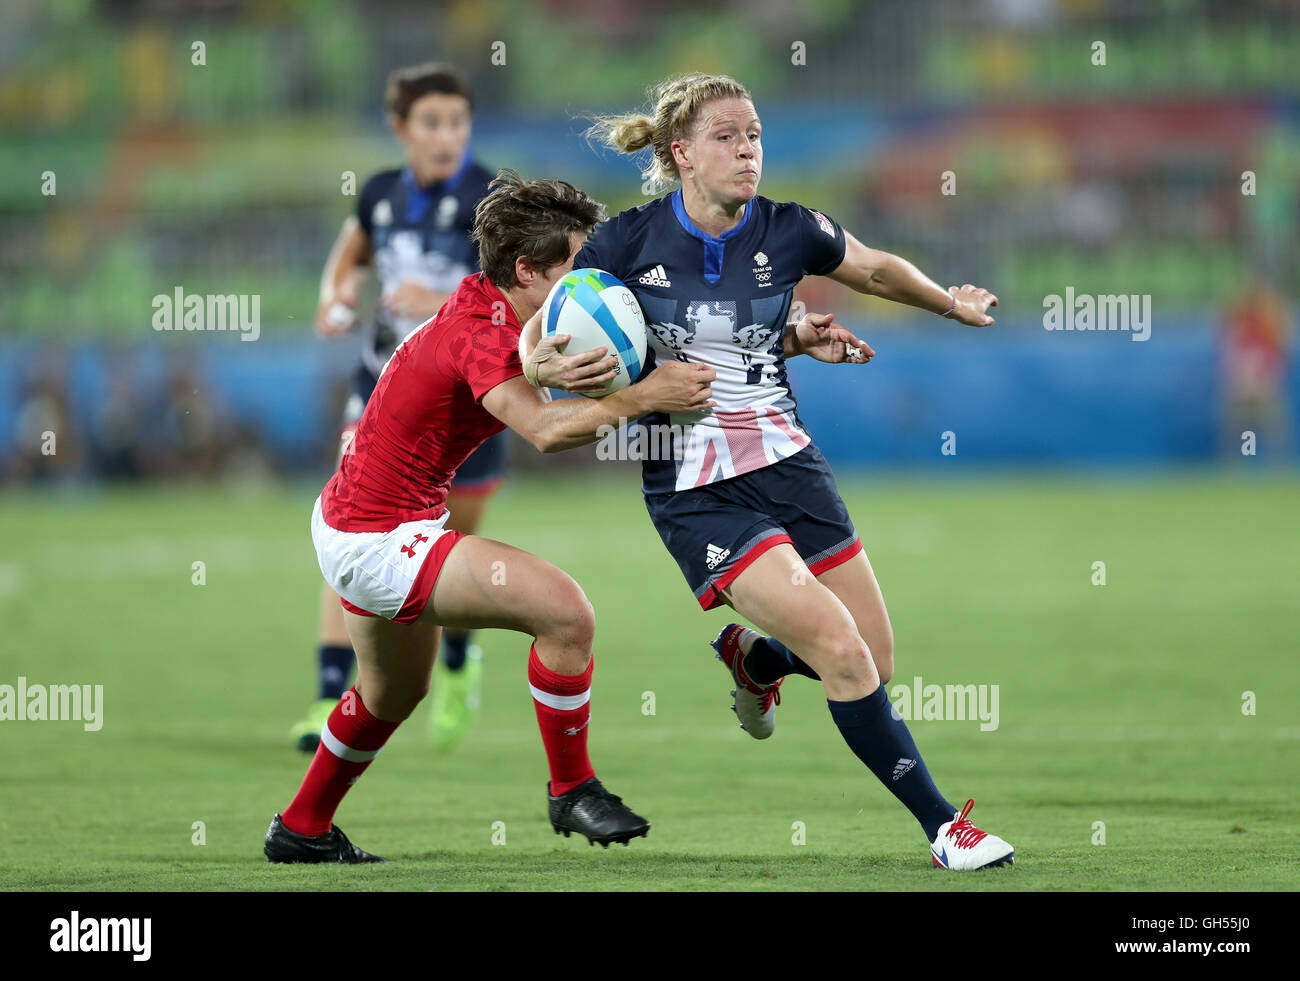 Great Britain's Danielle Waterman is tackled during the rugby sevens bronze medal match at the Deodoro Stadium on the third day of the Rio Olympic Games, Brazil. Stock Photo